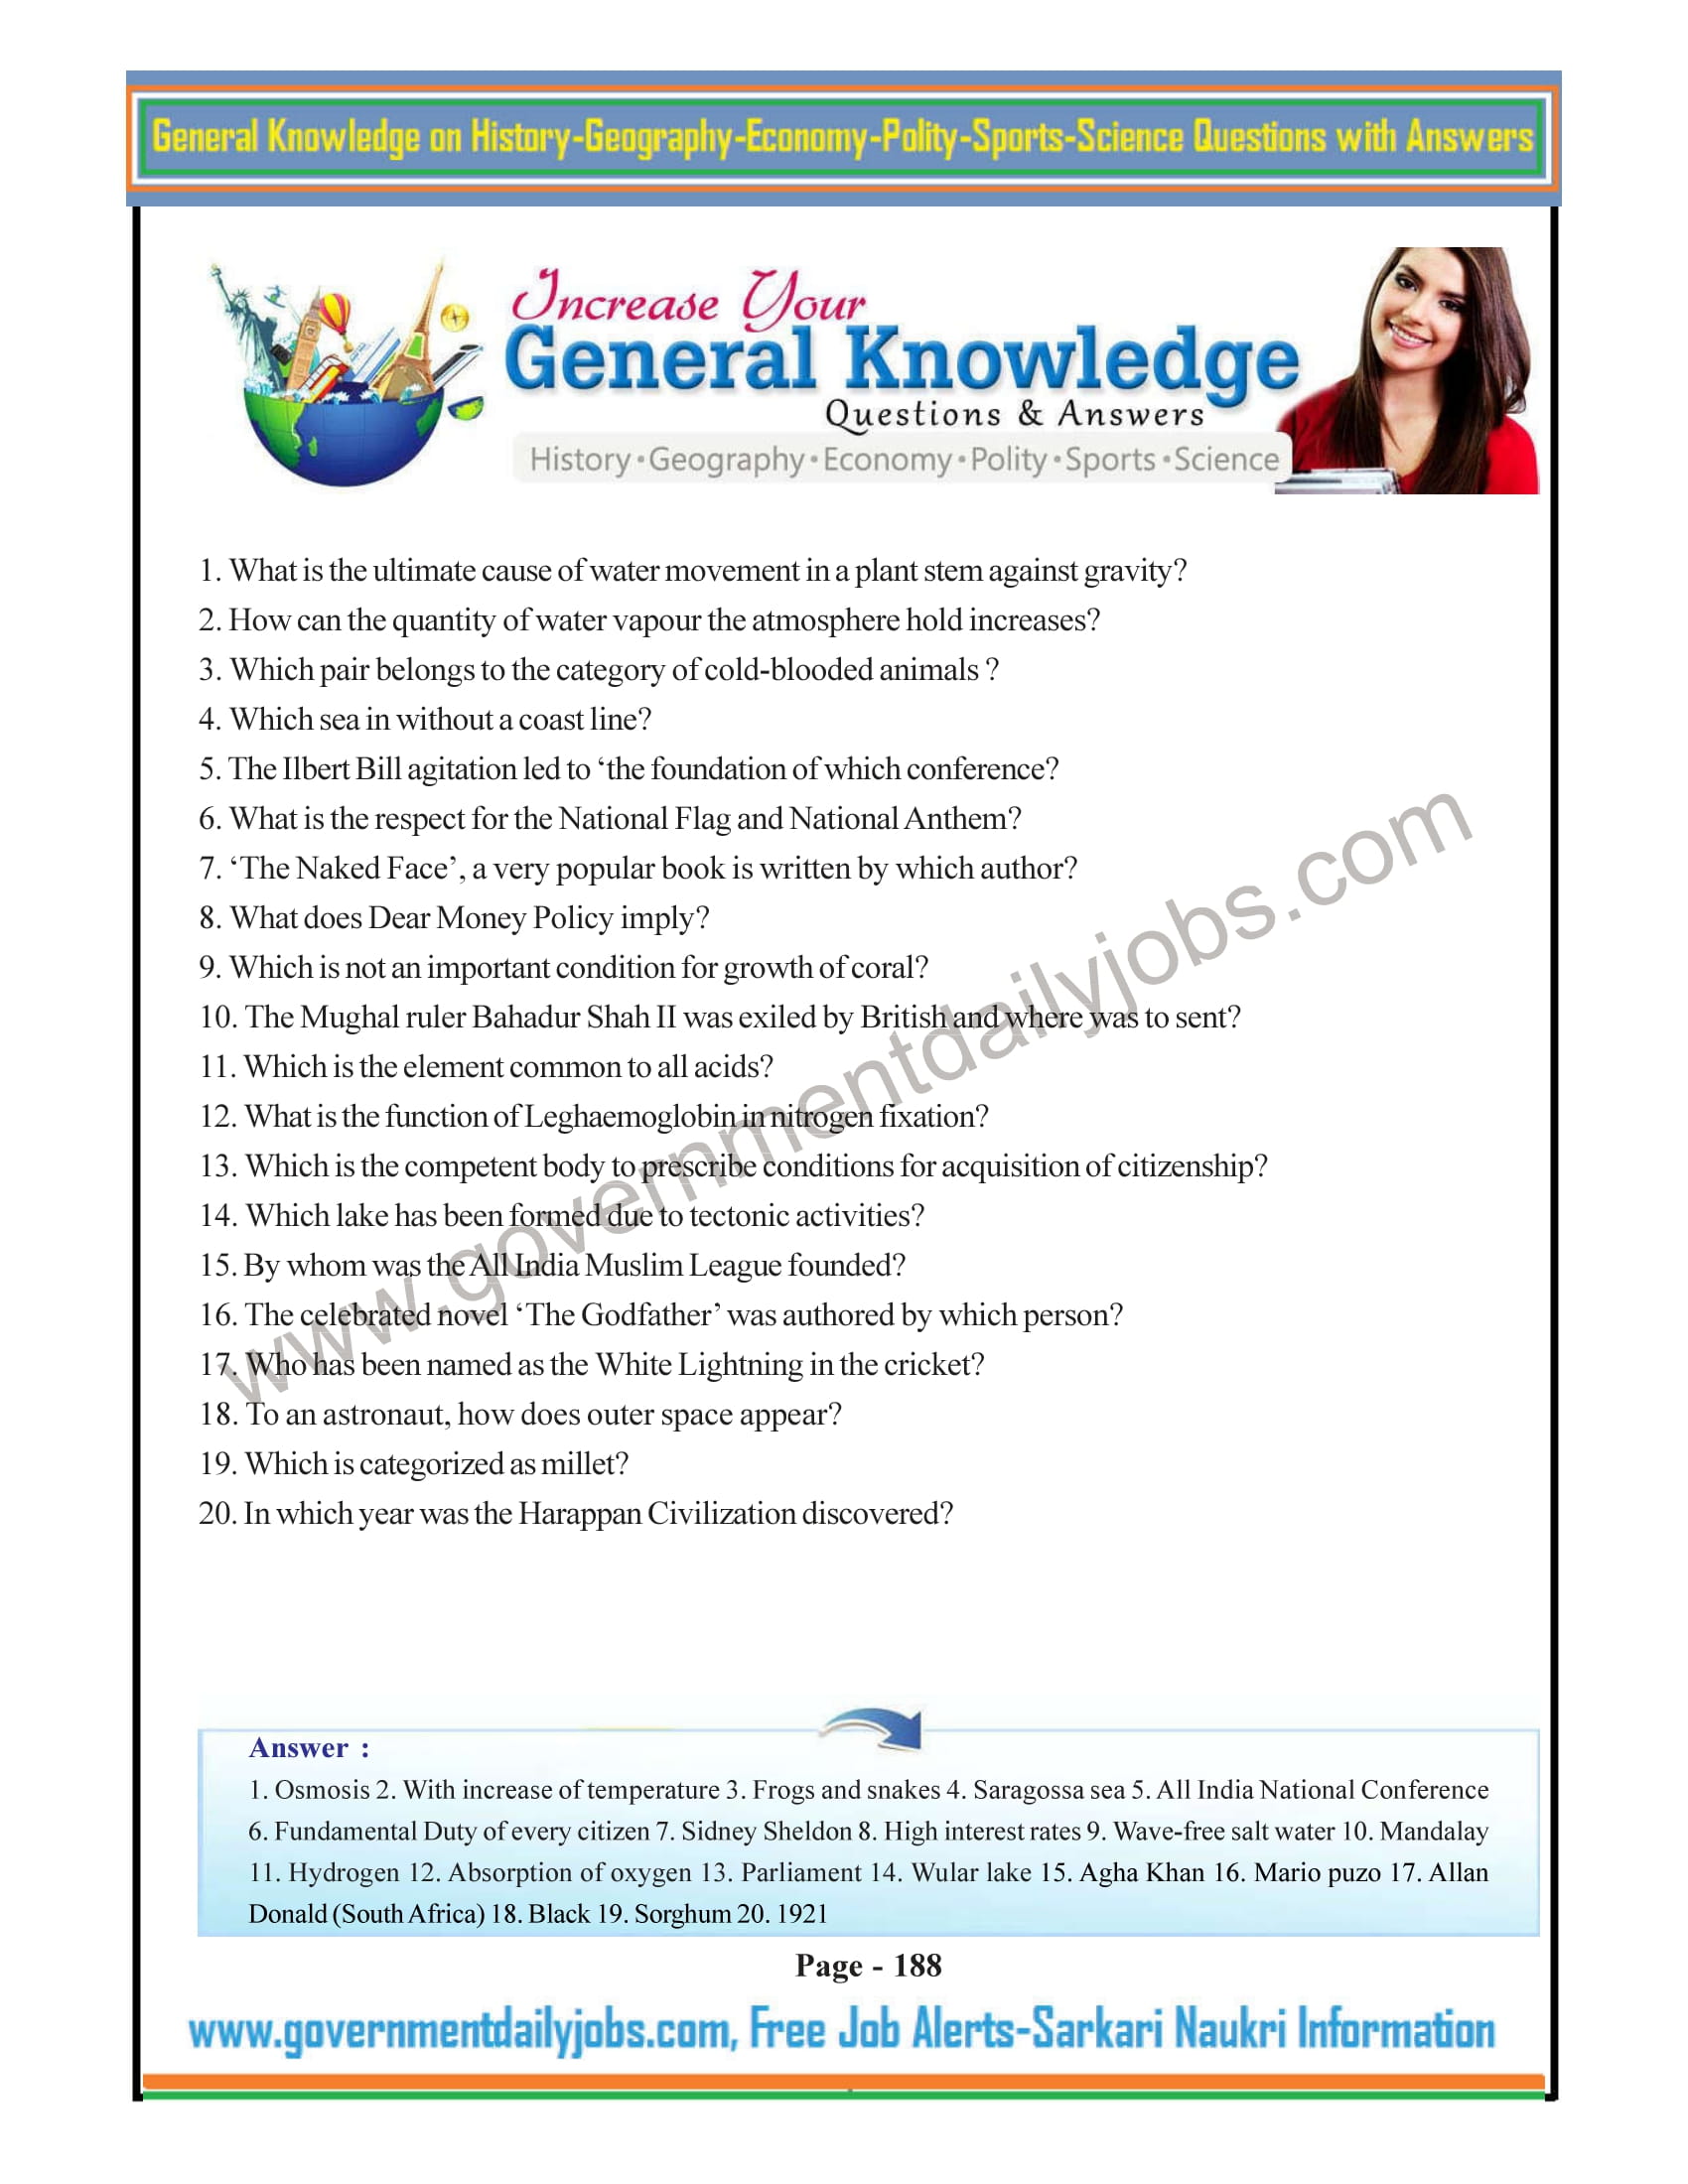 General Awareness Questions and Answers